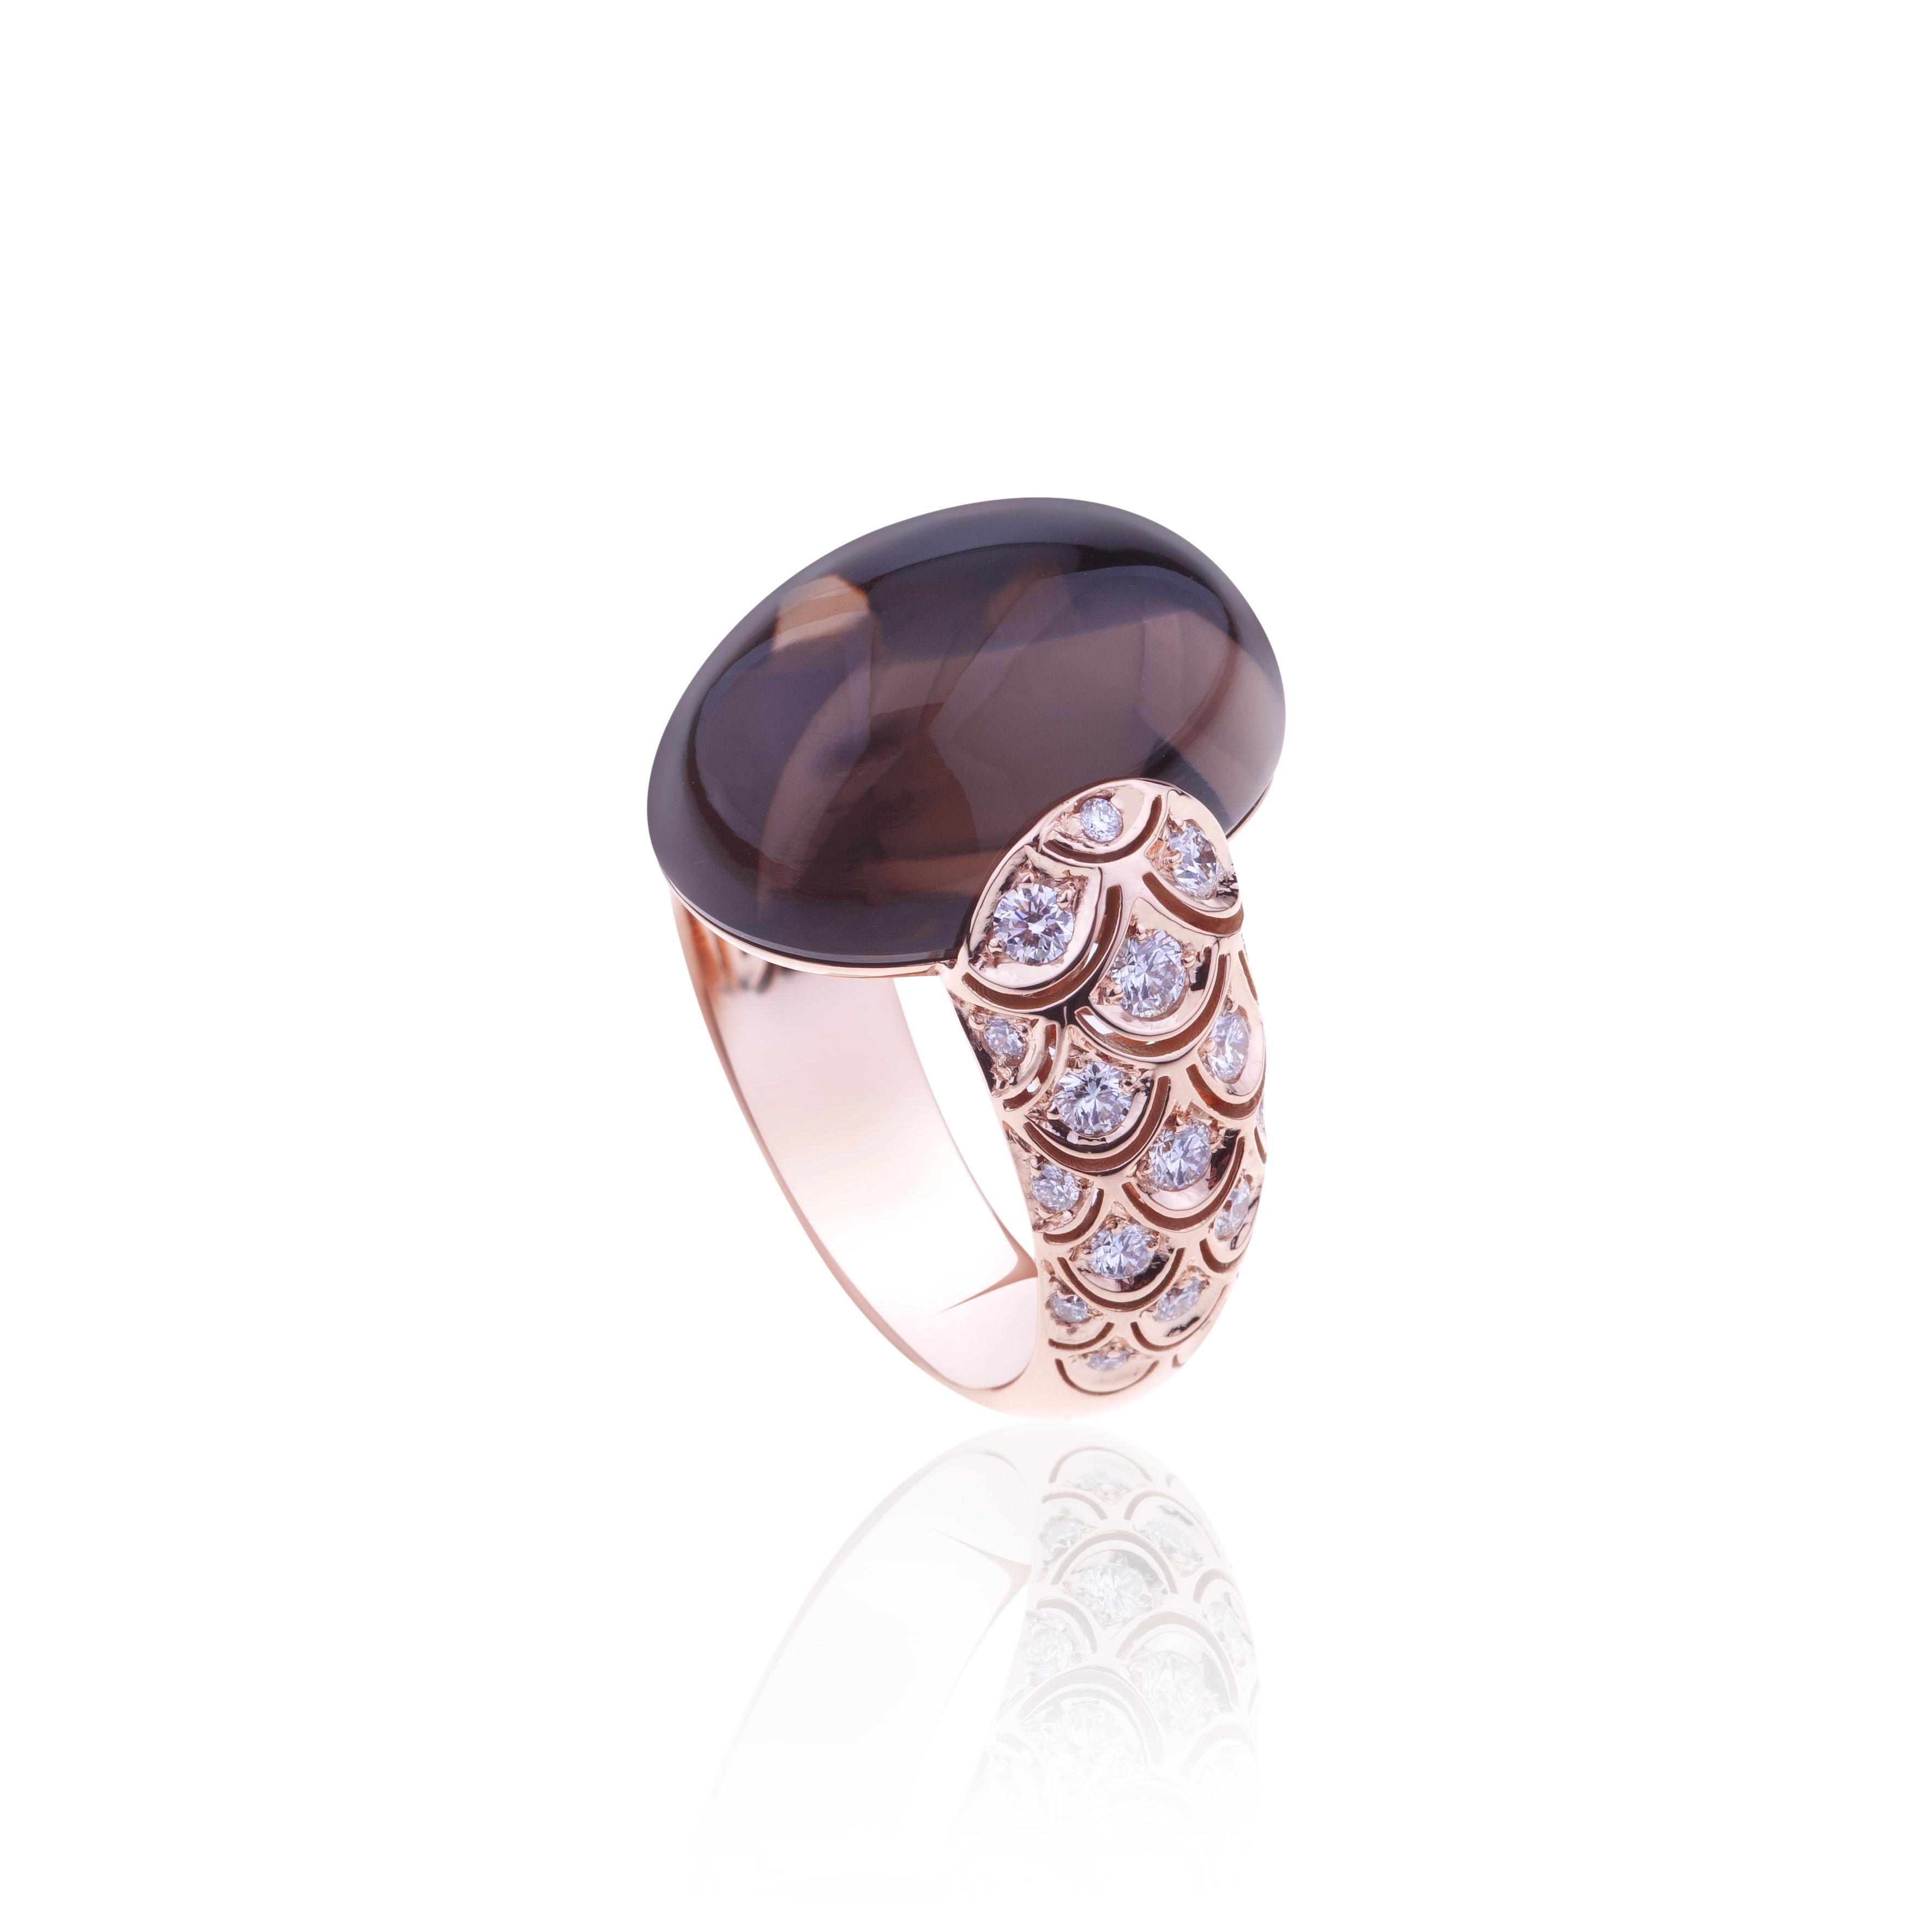 Angeletti Embrace Rose Gold With Diamonds and Cabochon Smoky Quarz Cocktail Ring.
New Wave Version, Designed and Manifactured in Rome. Available in Different Size.
Gold Weight is Around 8 Grams and the Size is 16 but Very Confortable for a range of